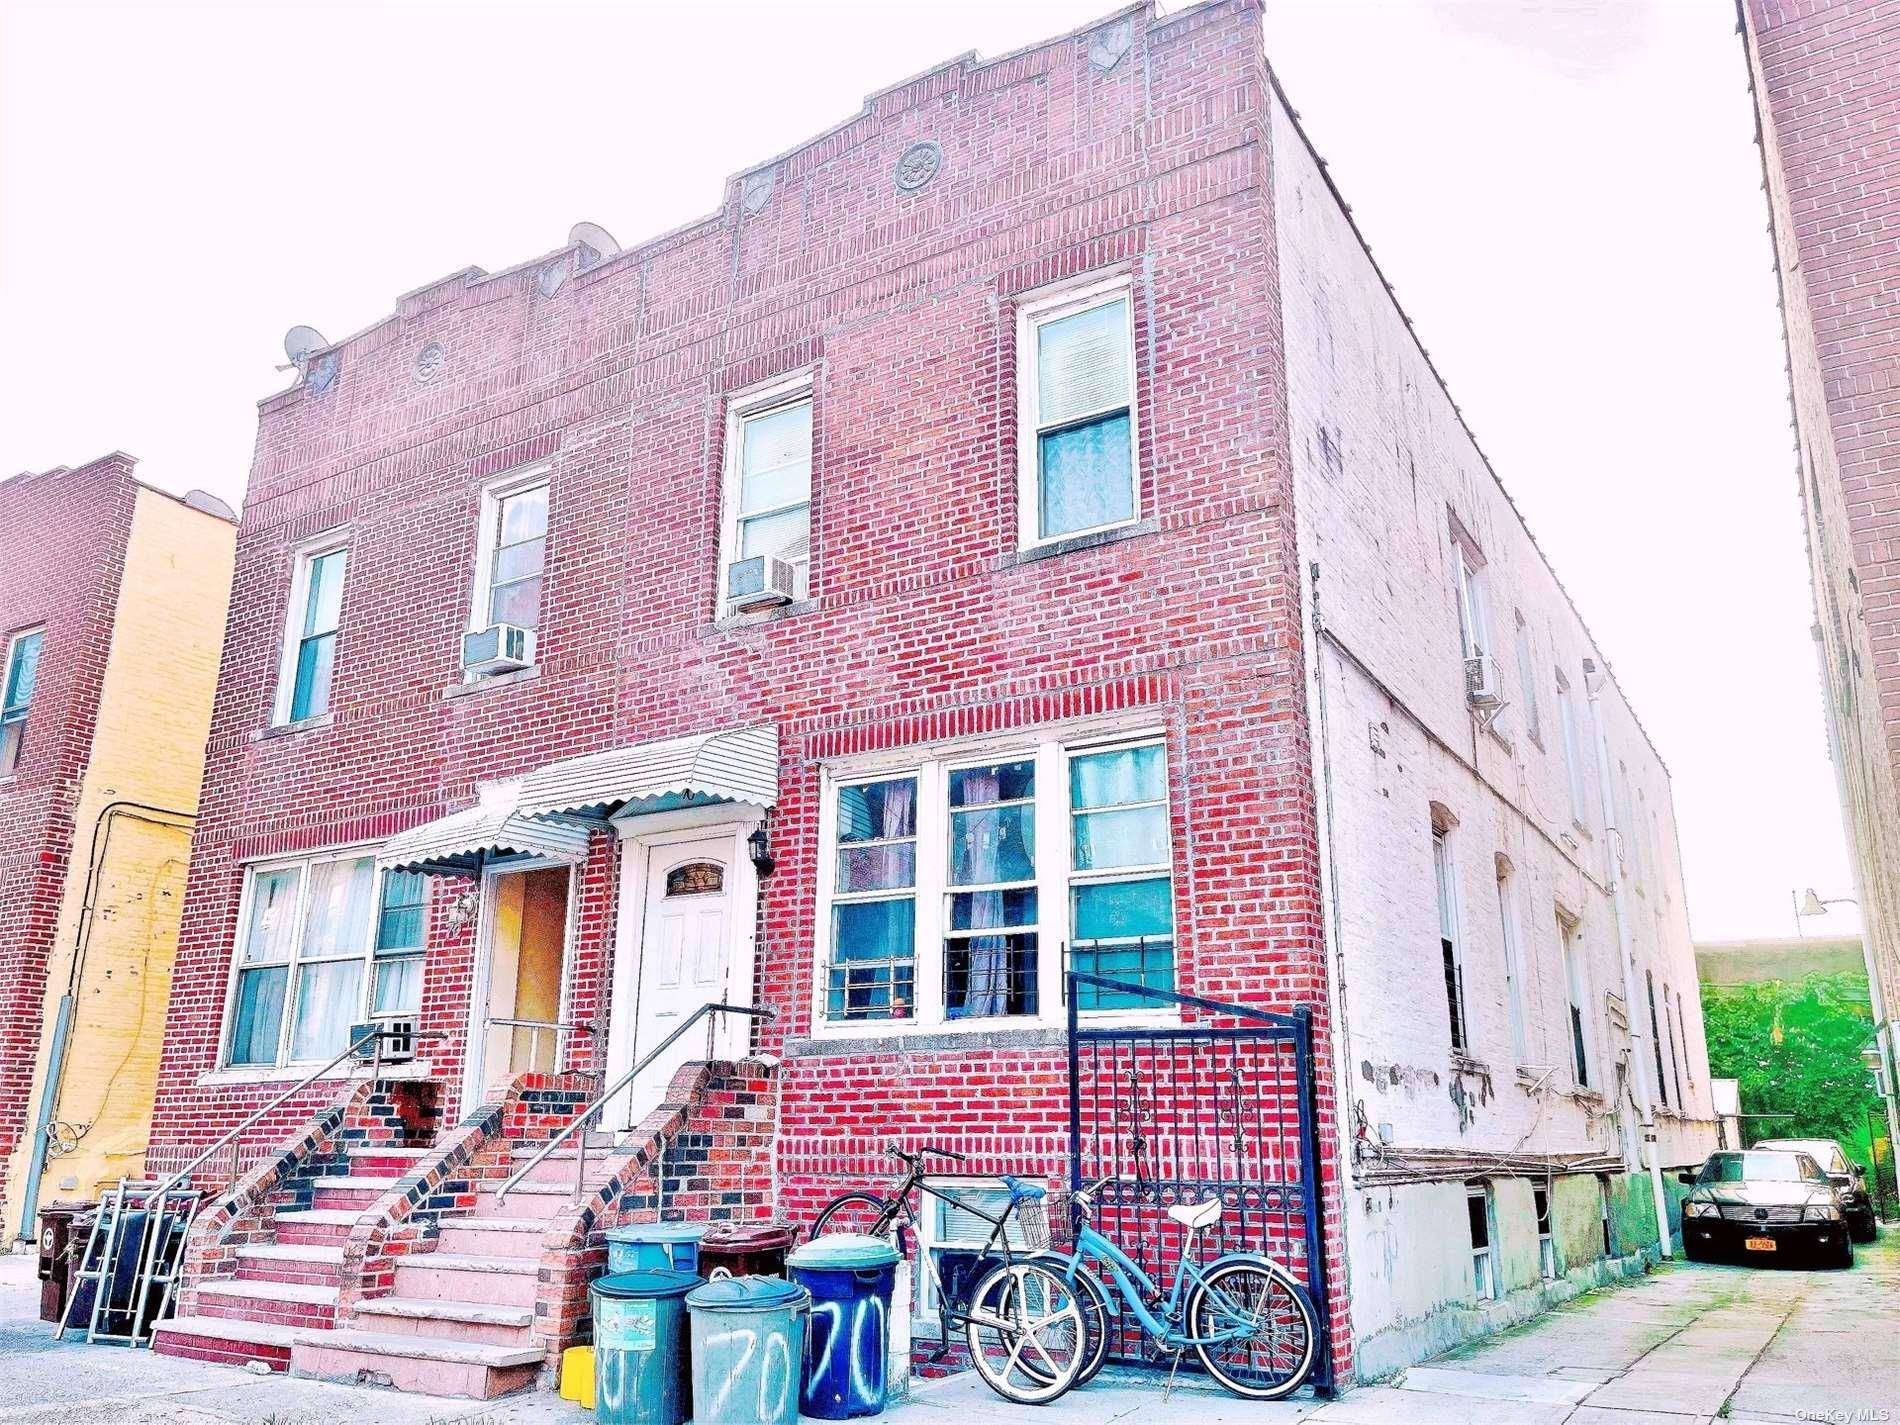 All brick triplex, consisting of three separate apartments 1st floor has an eat in kitchen, living room, formal dining room, 3 bedrooms, and 2 full baths.